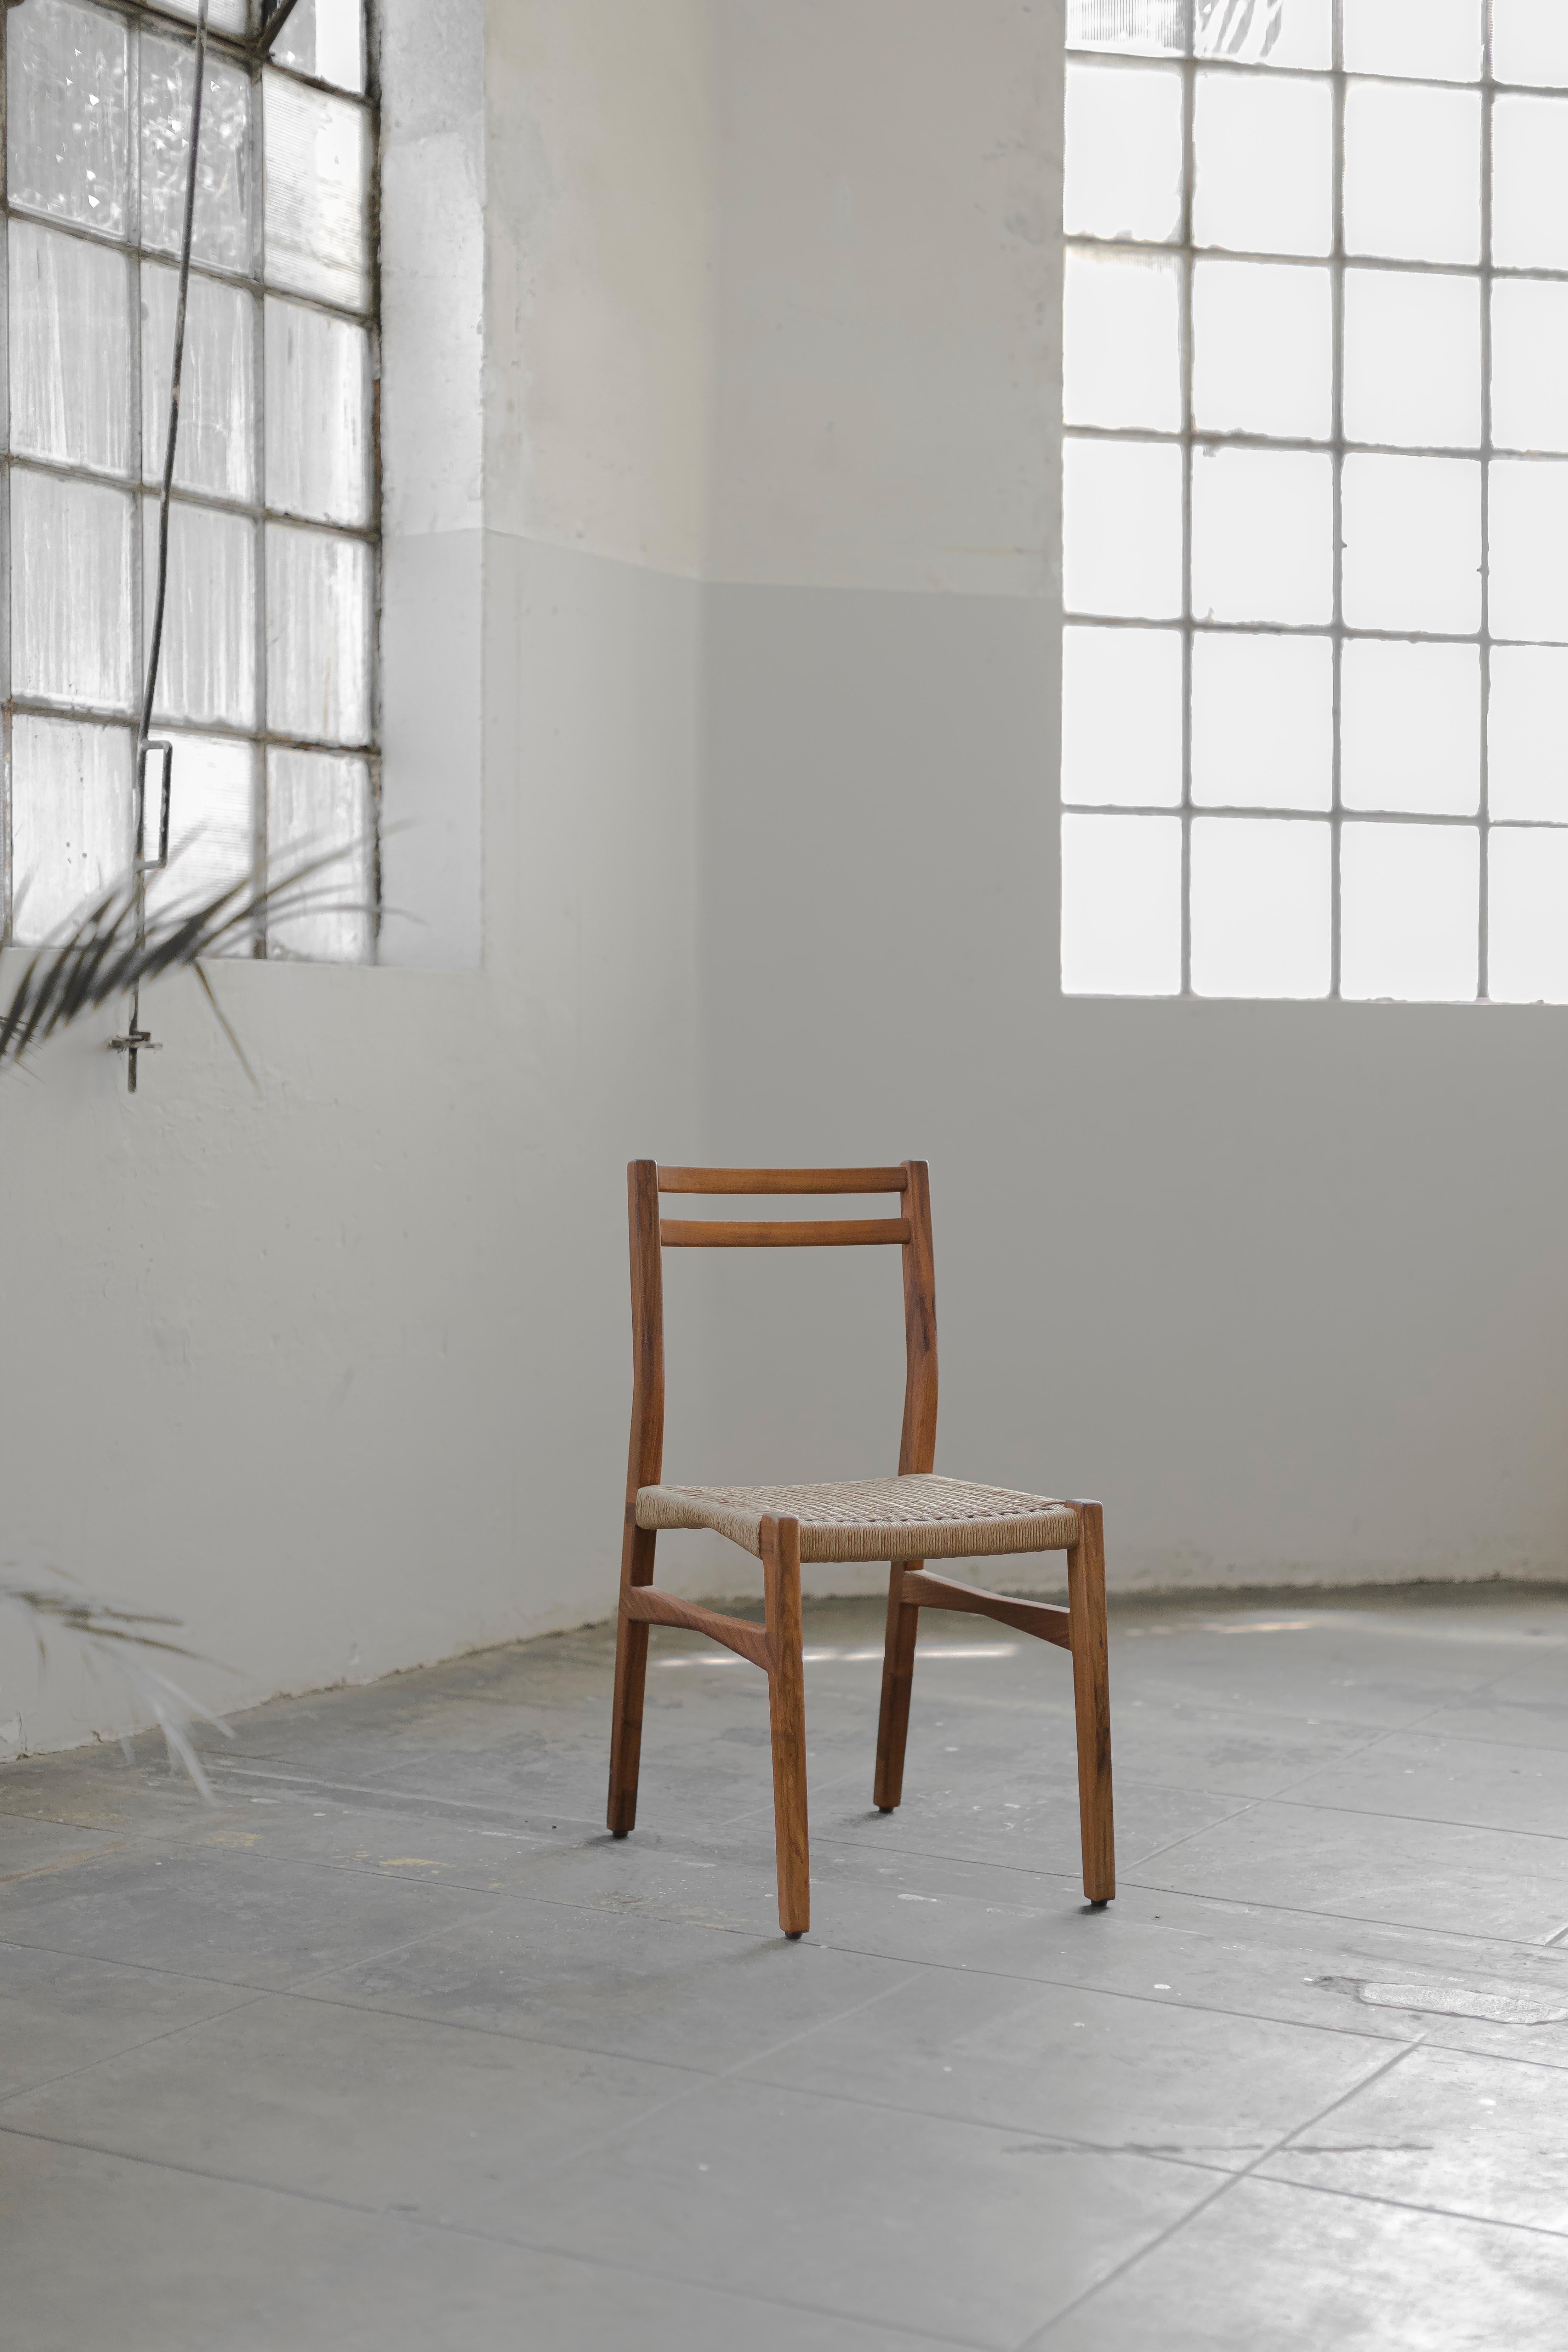 Wooden chair C Collection without armrest made of oak or tzalam wood and handwoven with papercord, jute or piola.